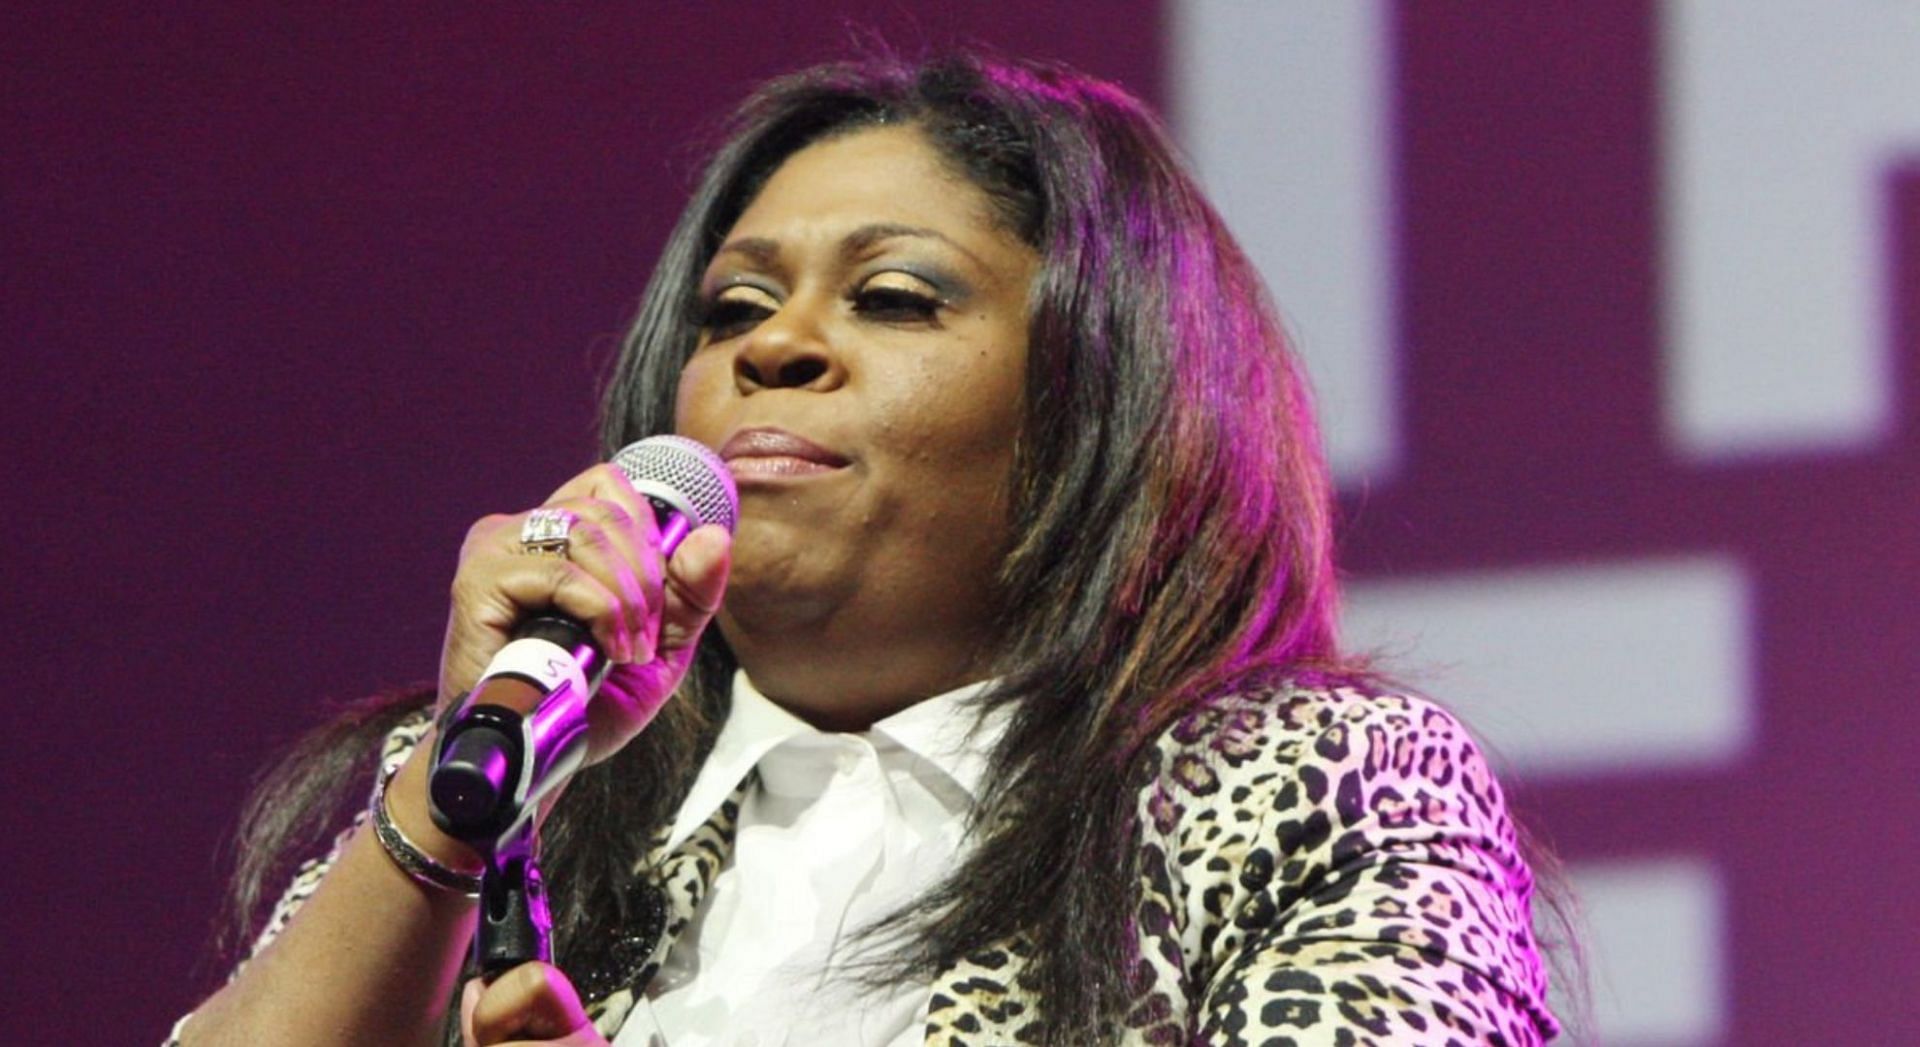 Singer Kim Burrell came under fire for calling churchgoers &quot;ugly&quot; (Image via Bennett Raglin/WireImage)